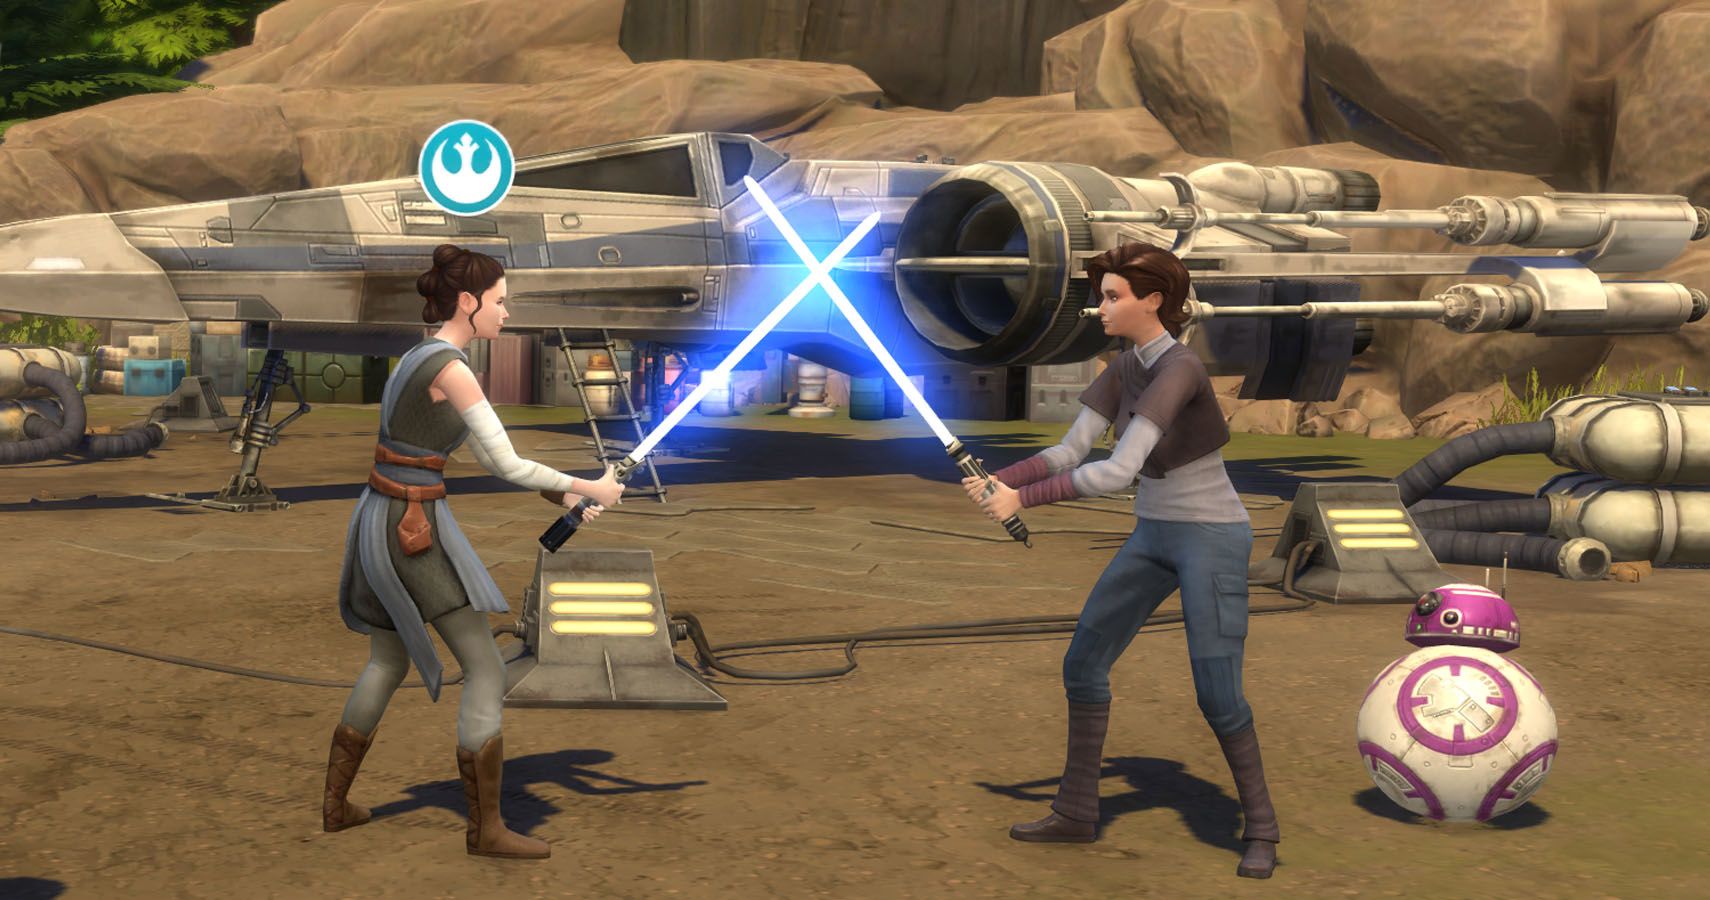 Rey and a female sim engage in a lightsaber battle in front of an x-wing.